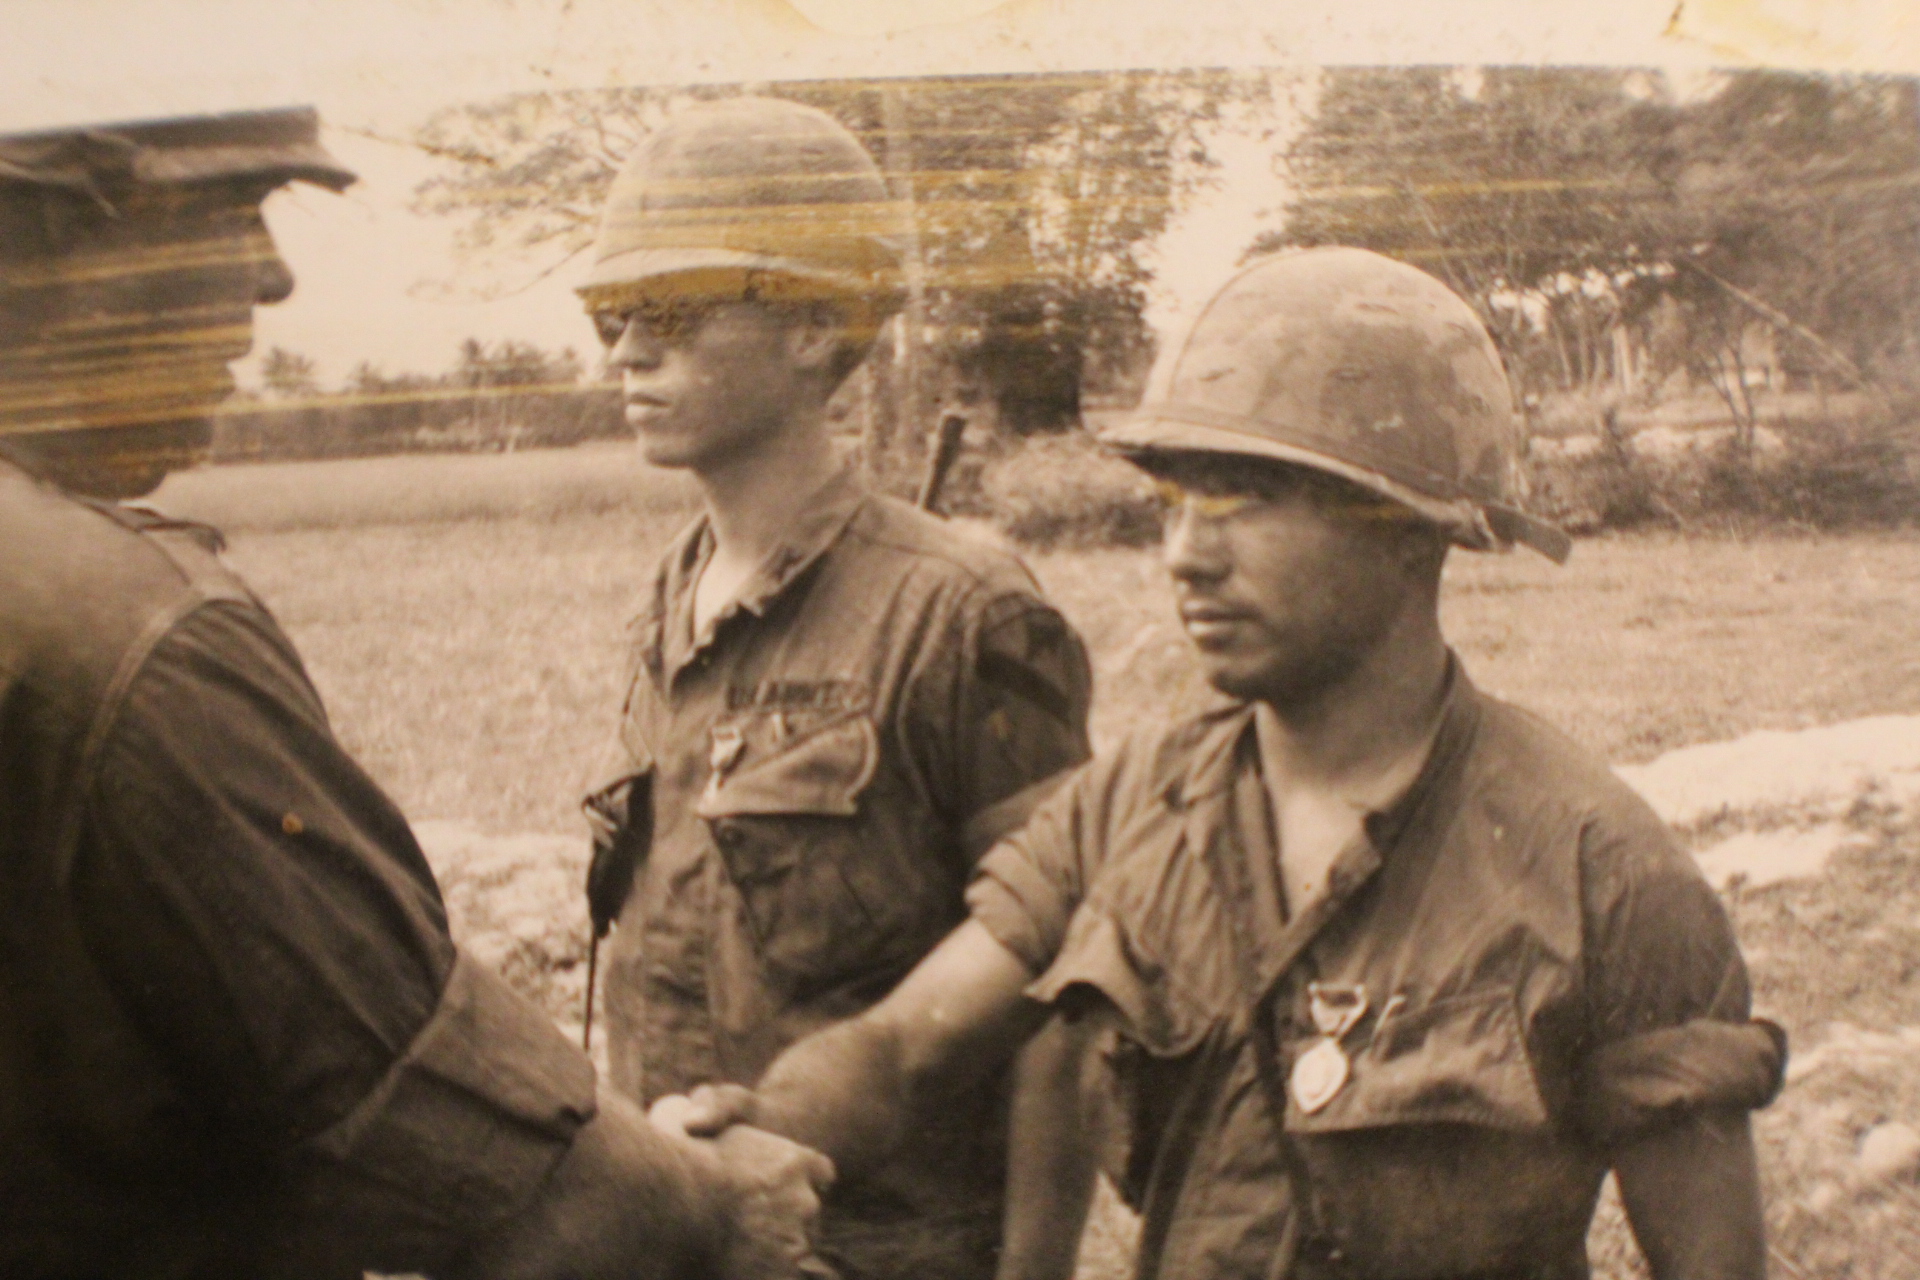 Sgt. Rigoberto Ordaz being awarded the Purple Heart Medal for wounds sustained during the Tet Offensive battles in 1968. Our Battalion commander pinned the medals to my Platoon Leader and myself. These battles and others are the subject of an upcoming b